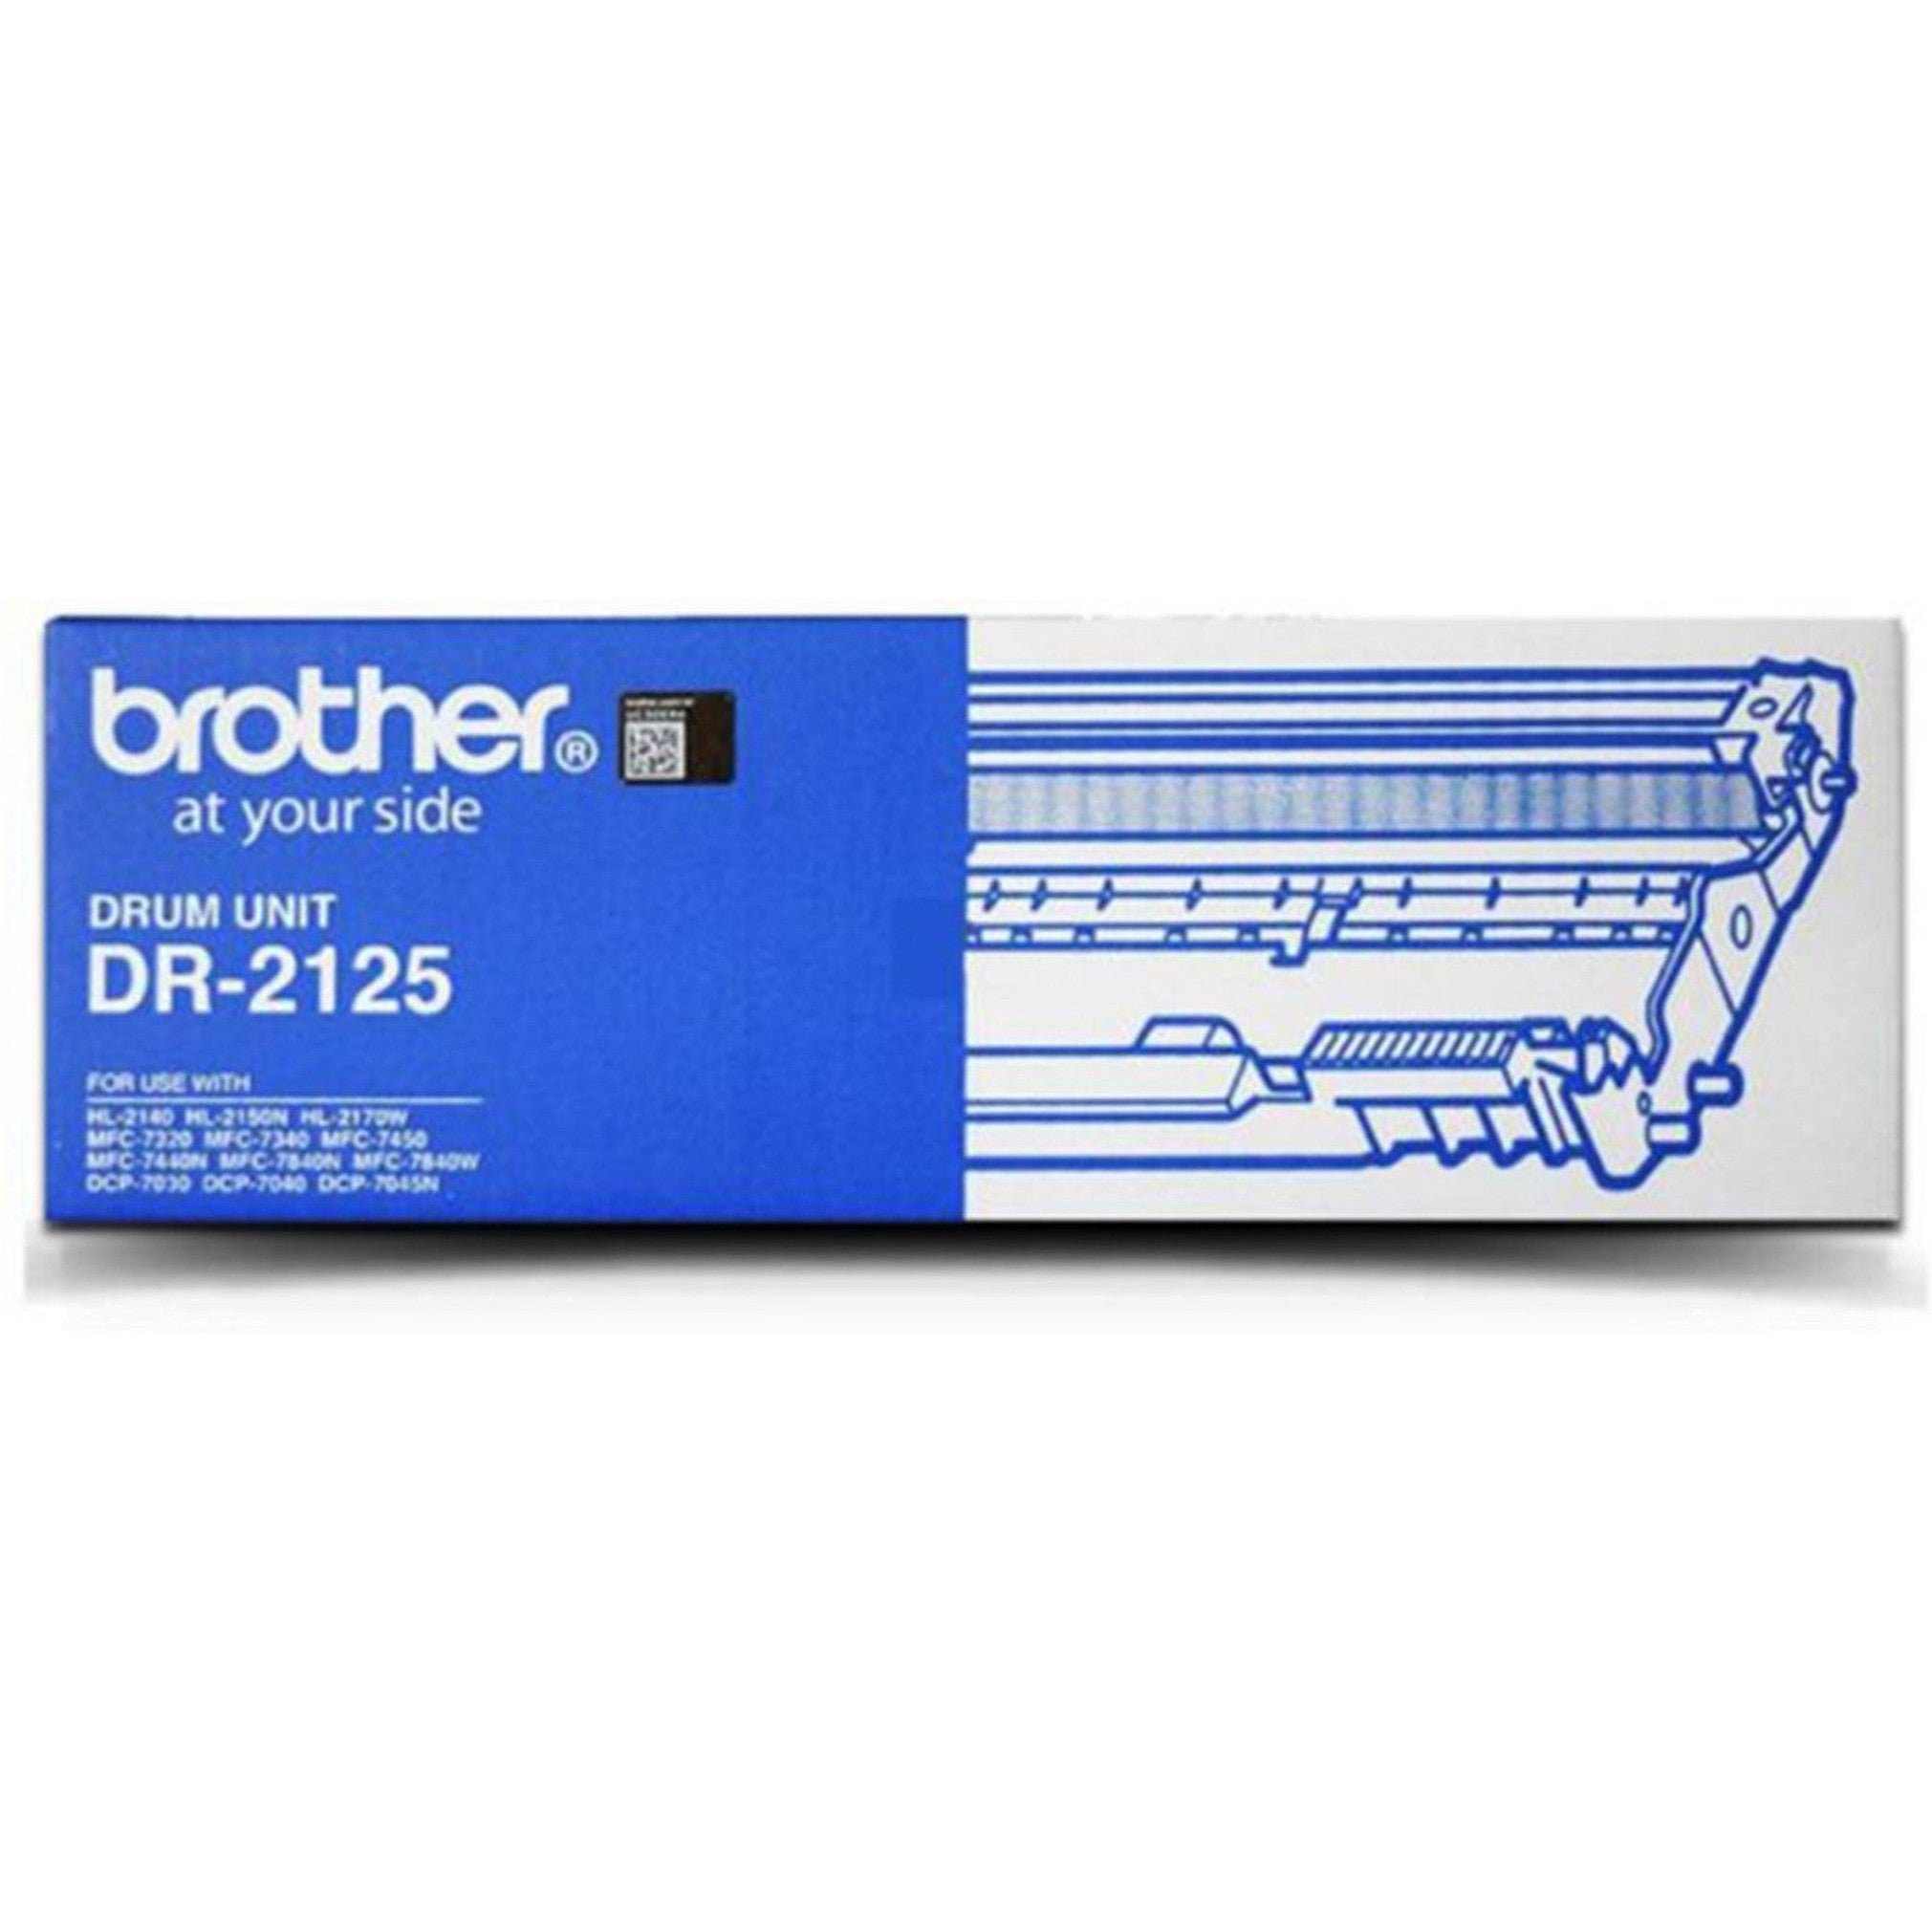 Brother Dr 2125 Drum Cartridge-Inks And Toners-Brother-Star Light Kuwait